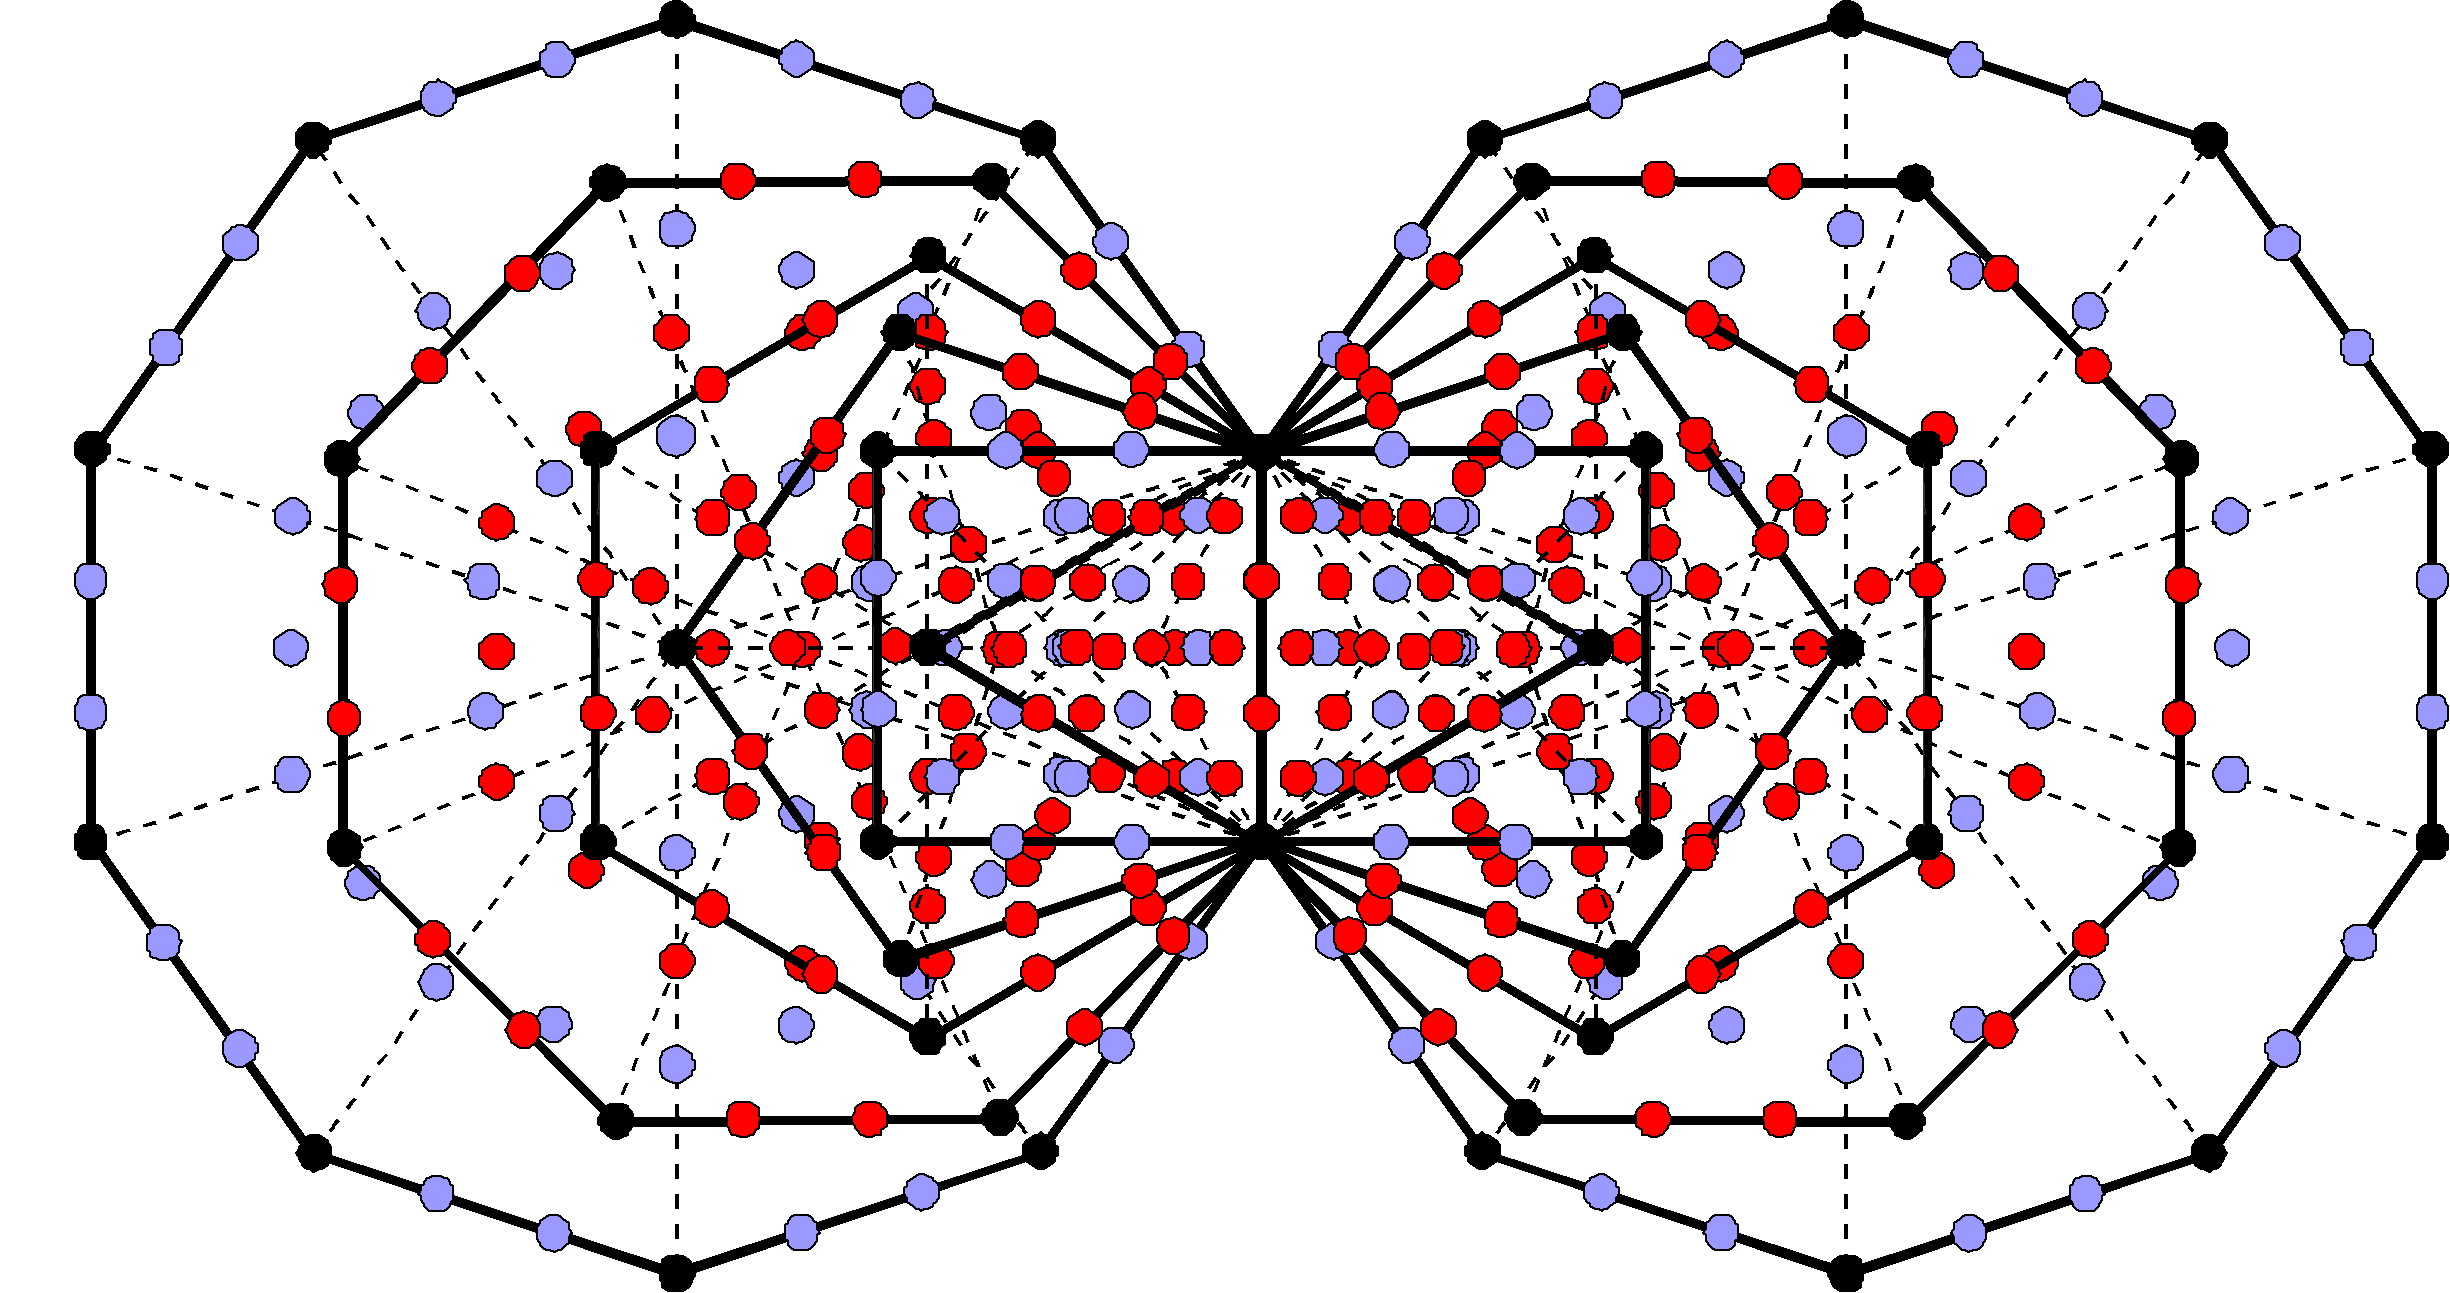 336 yods other than corners in 1st (6+6) enfolded polygons